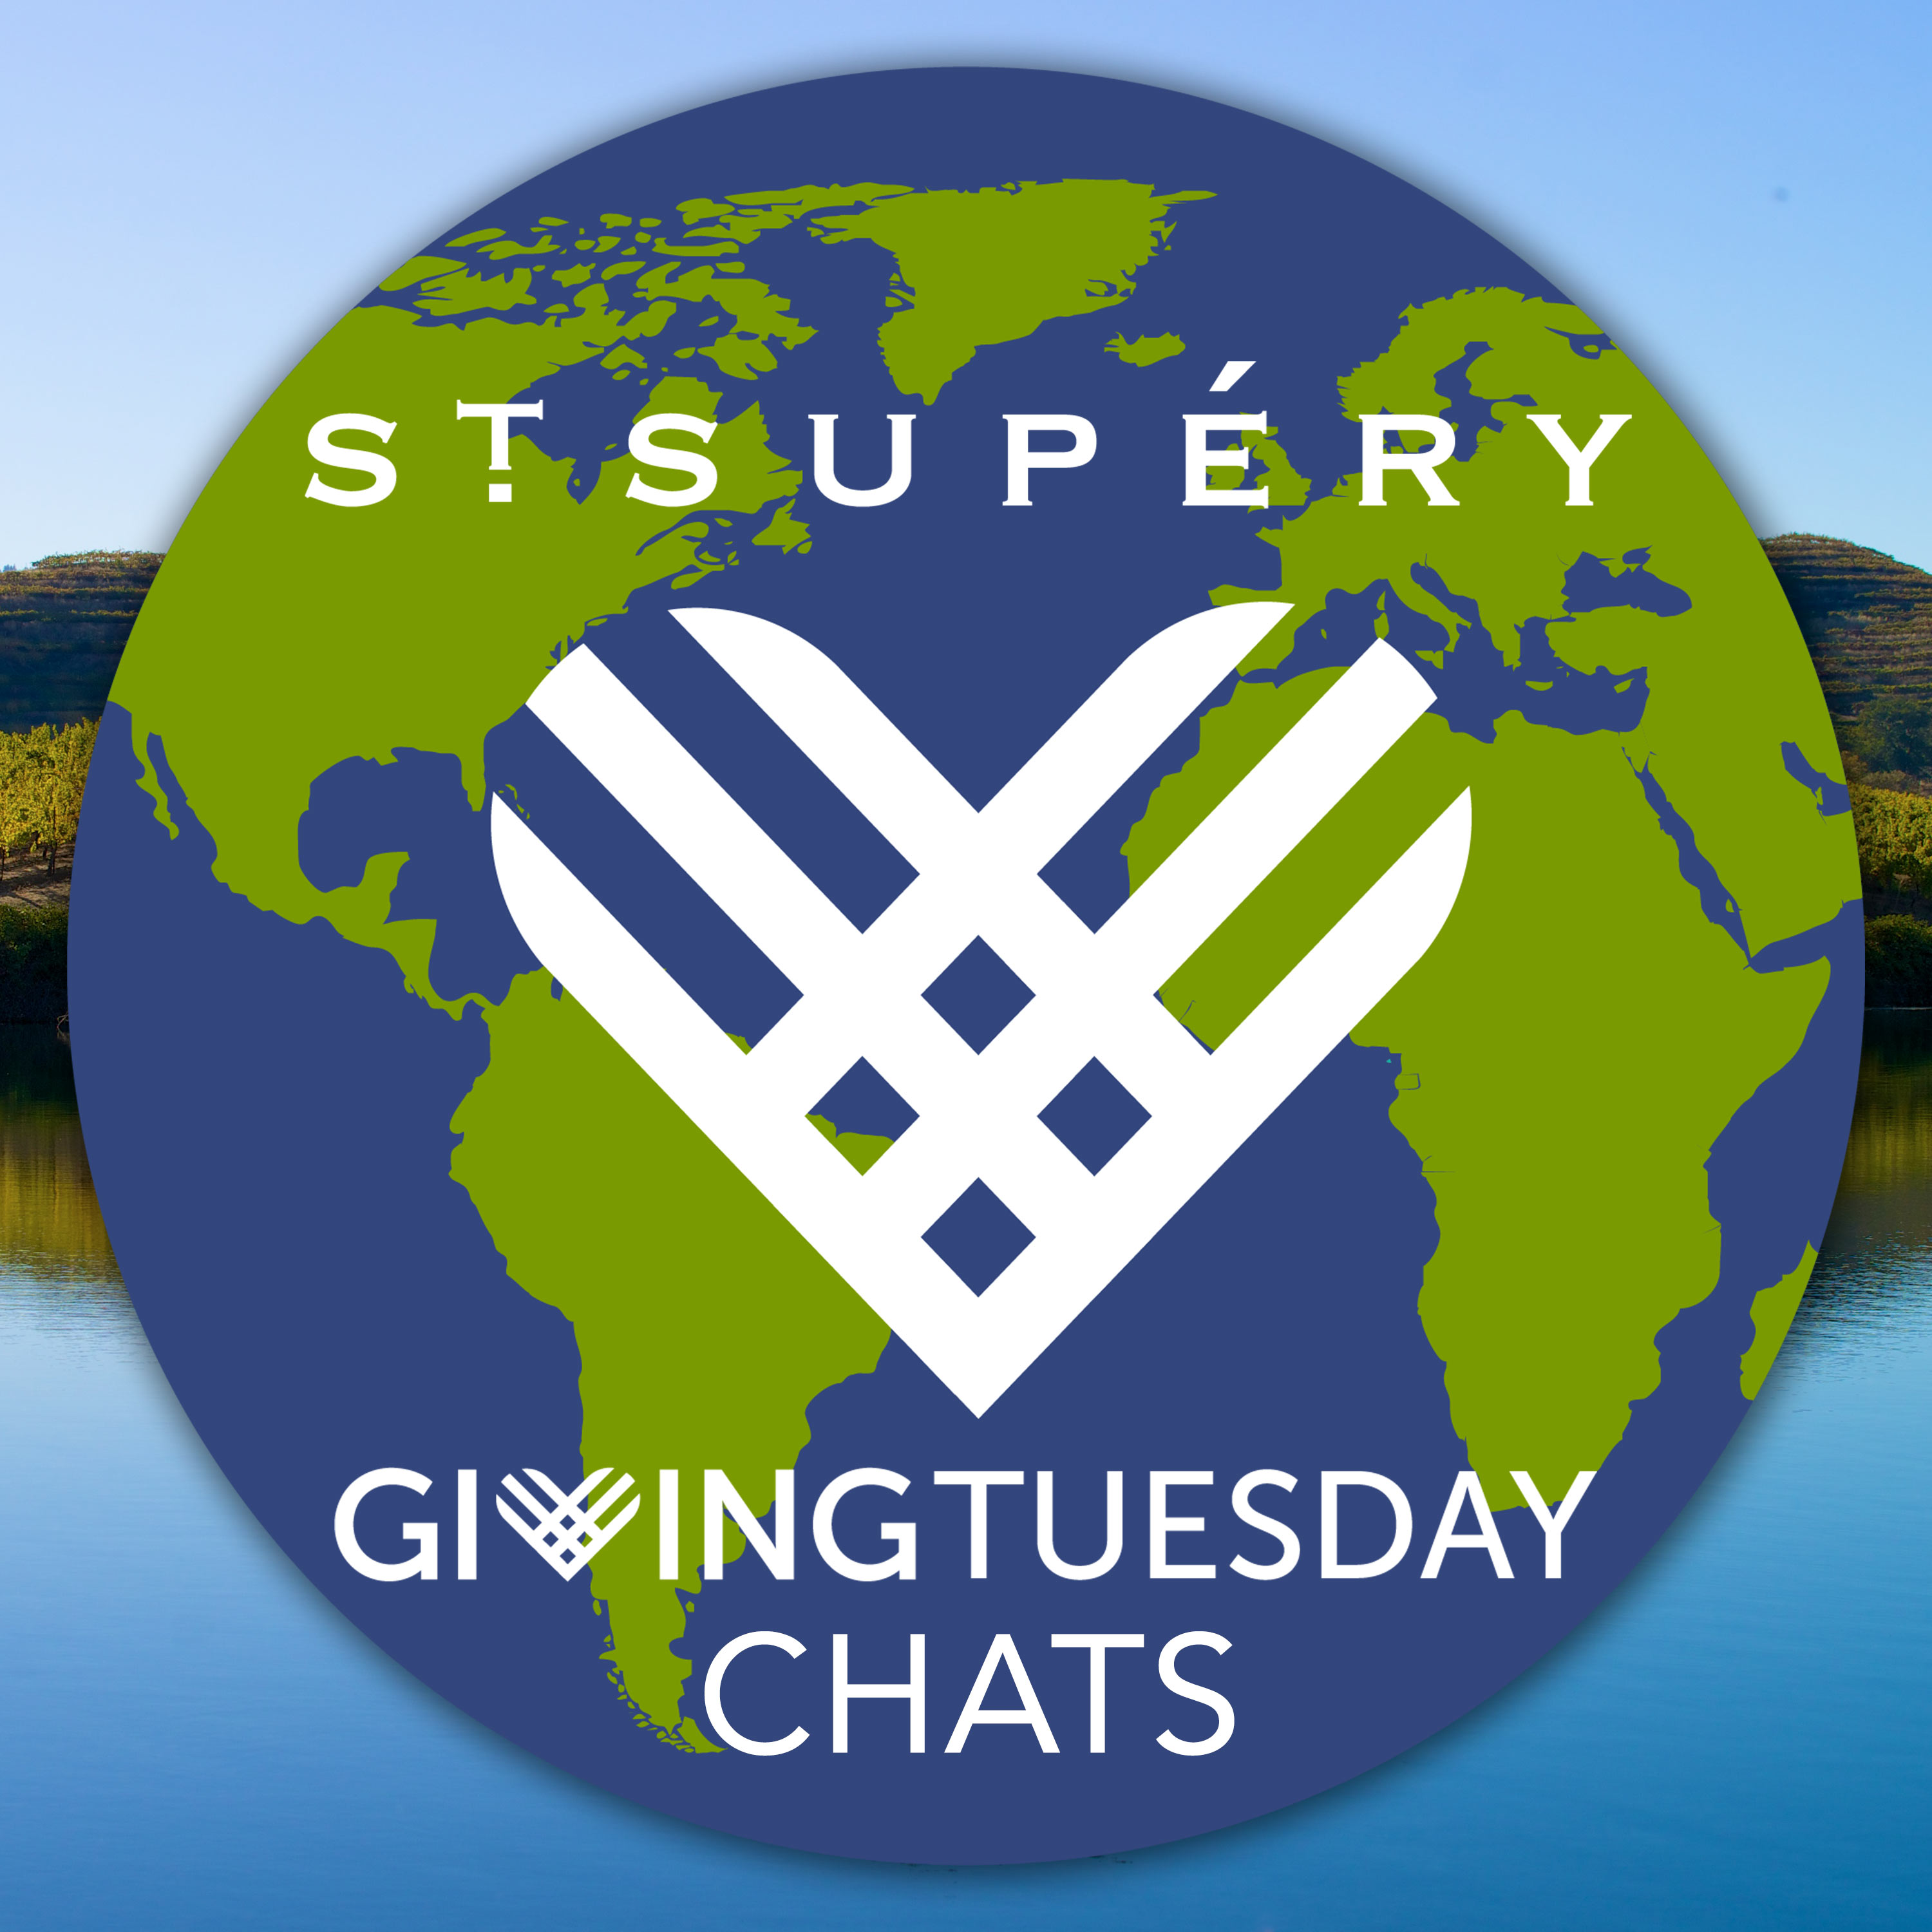 Artwork for podcast St. Supéry #GivingTuesday Chats